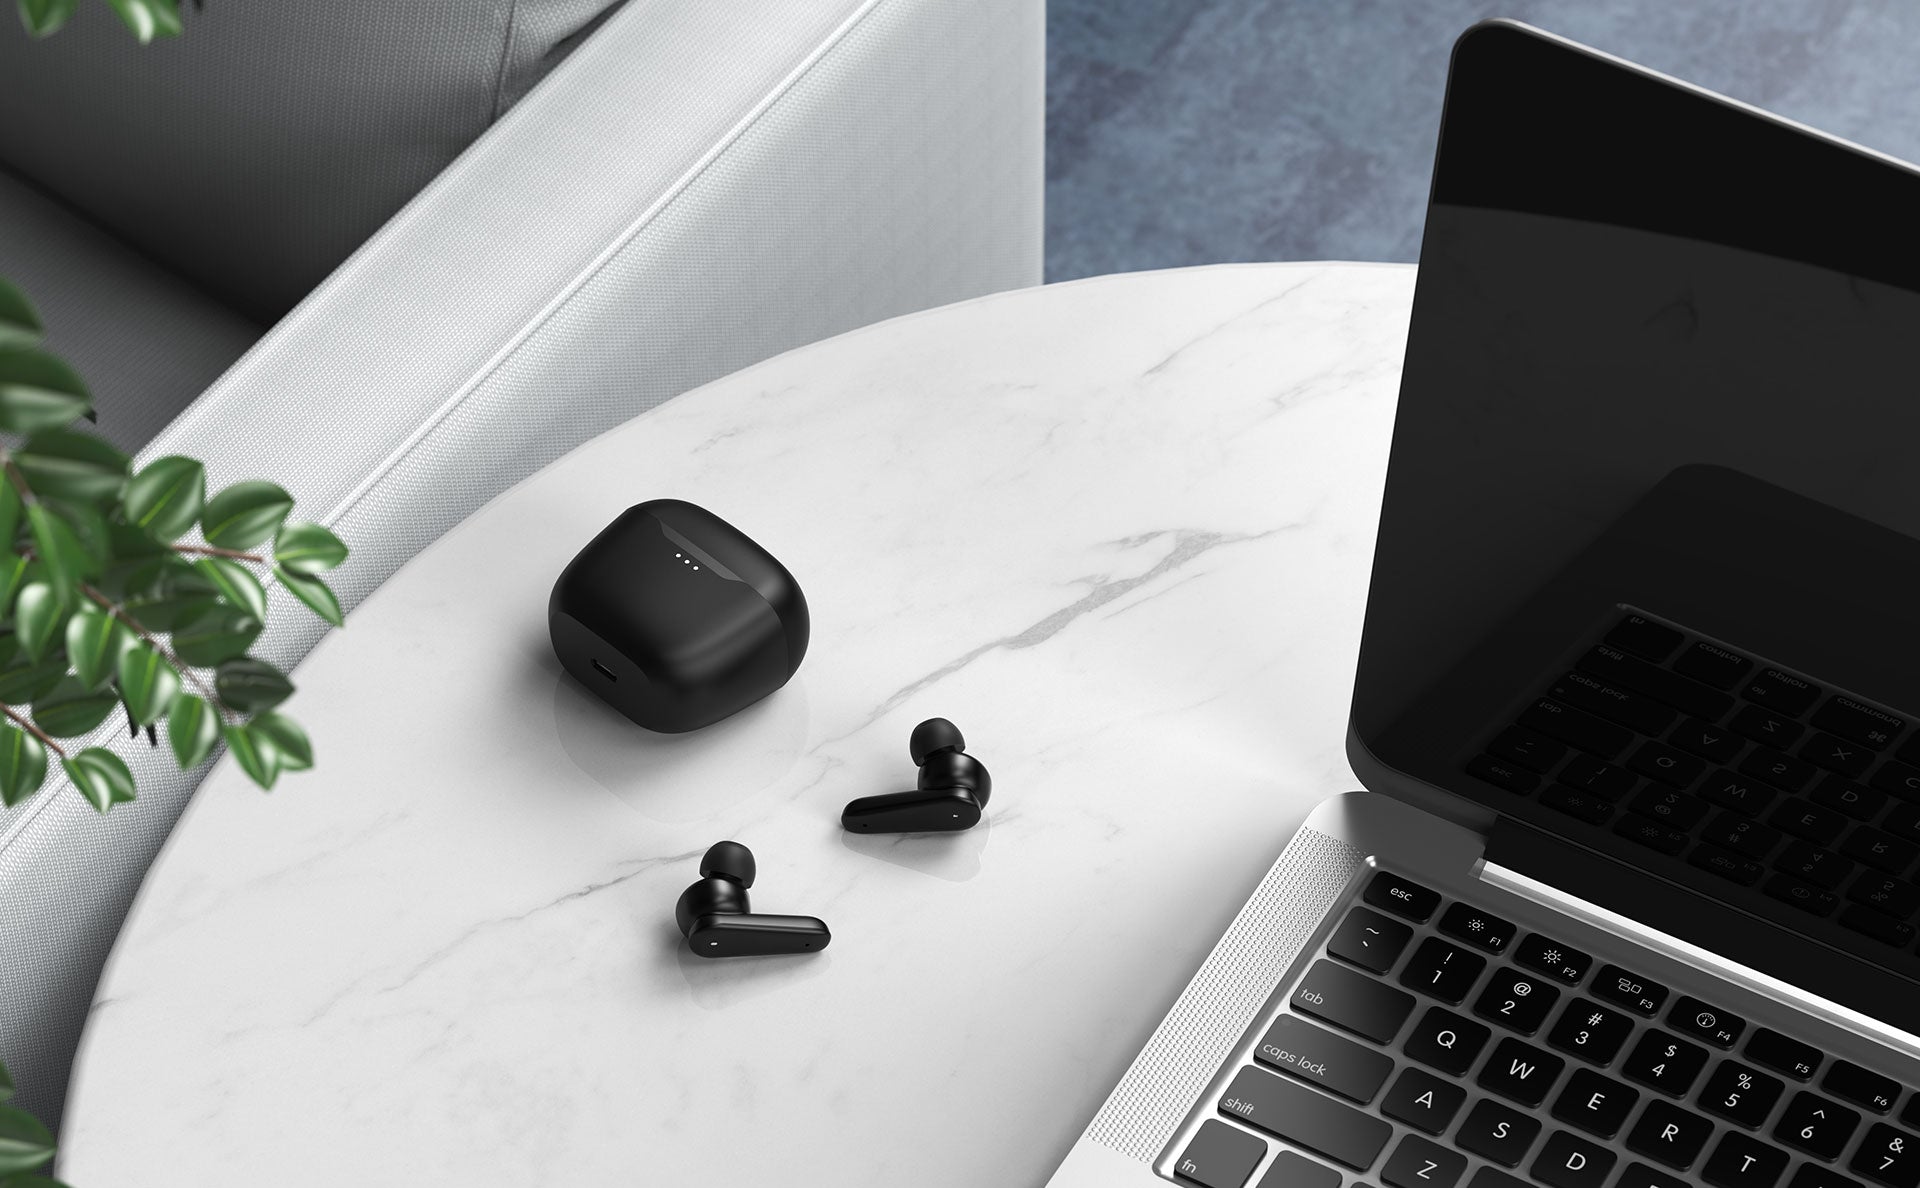 ENACFIRE H500 Wireless Earbuds - picture show